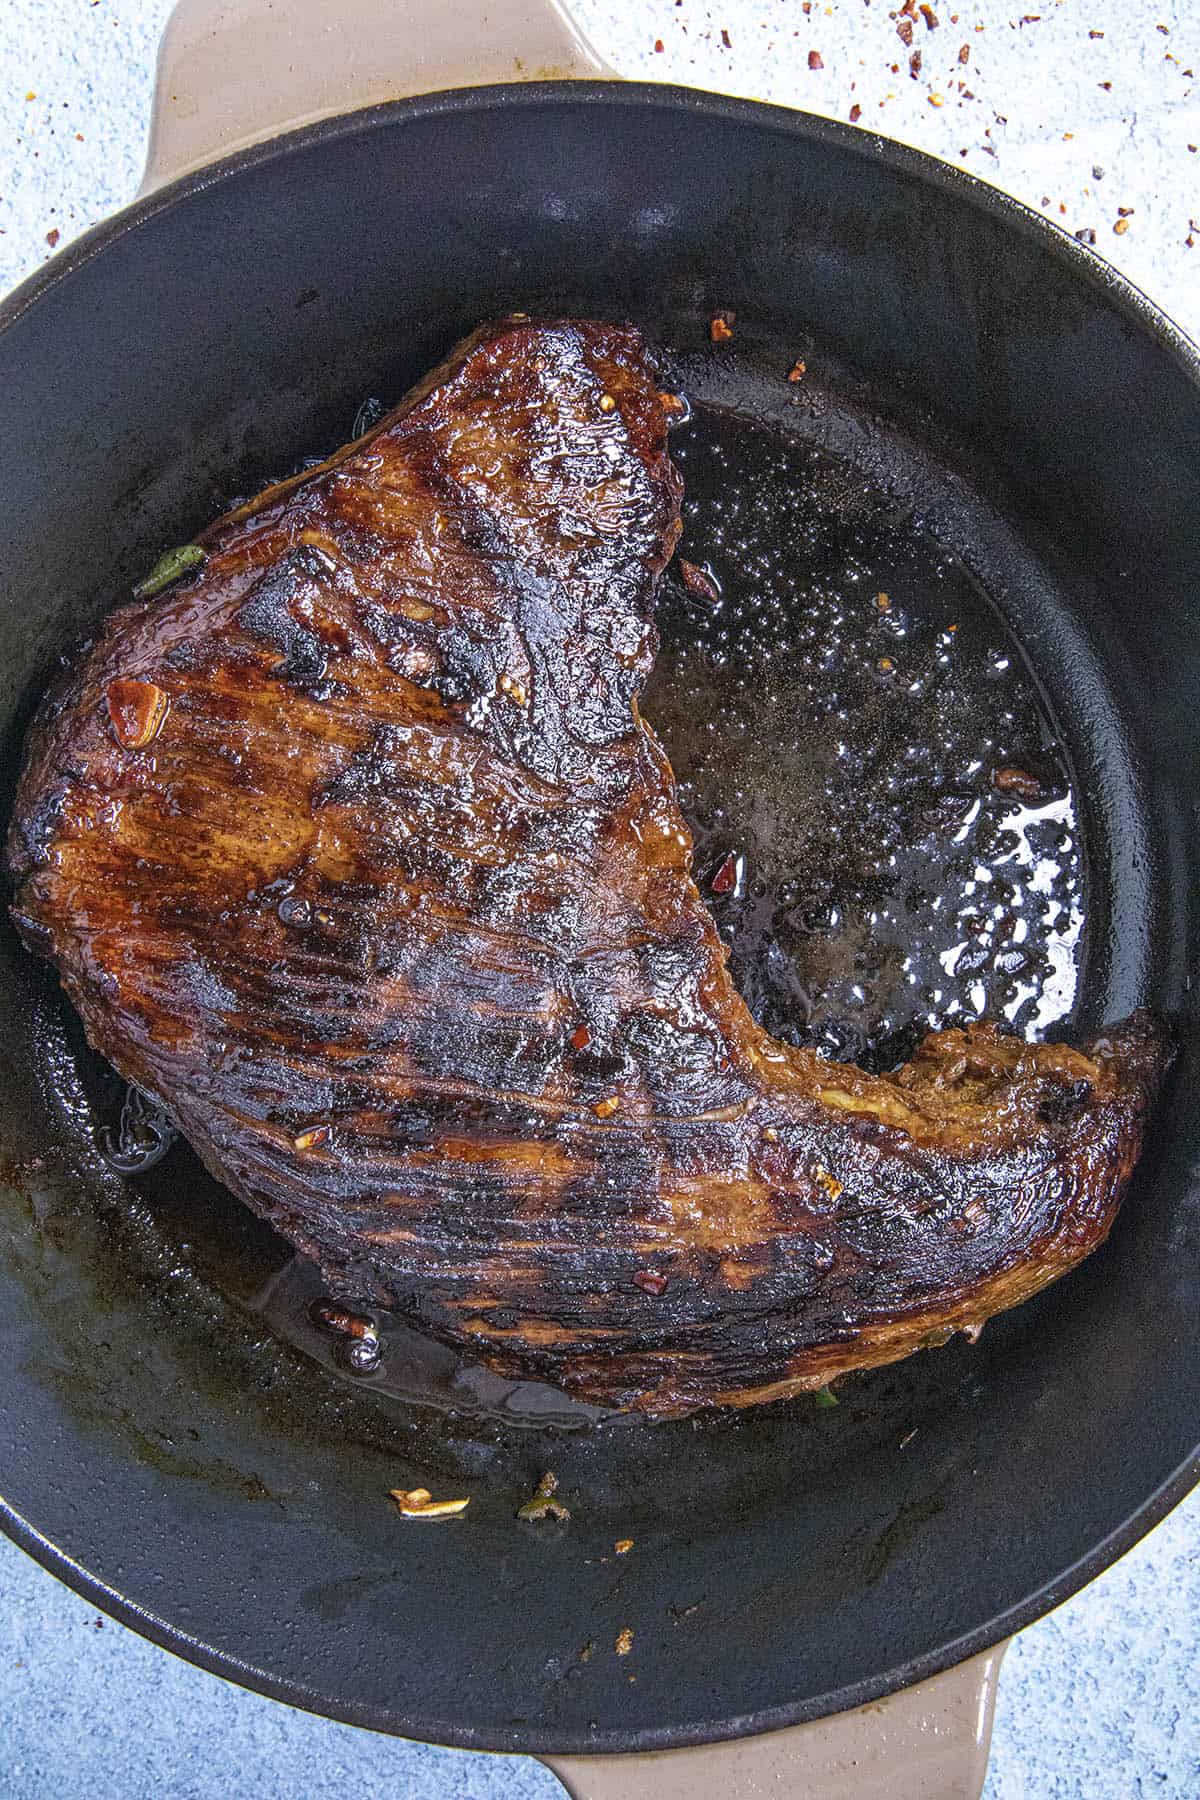 Searing the marinated tri tip in a cast iron pan